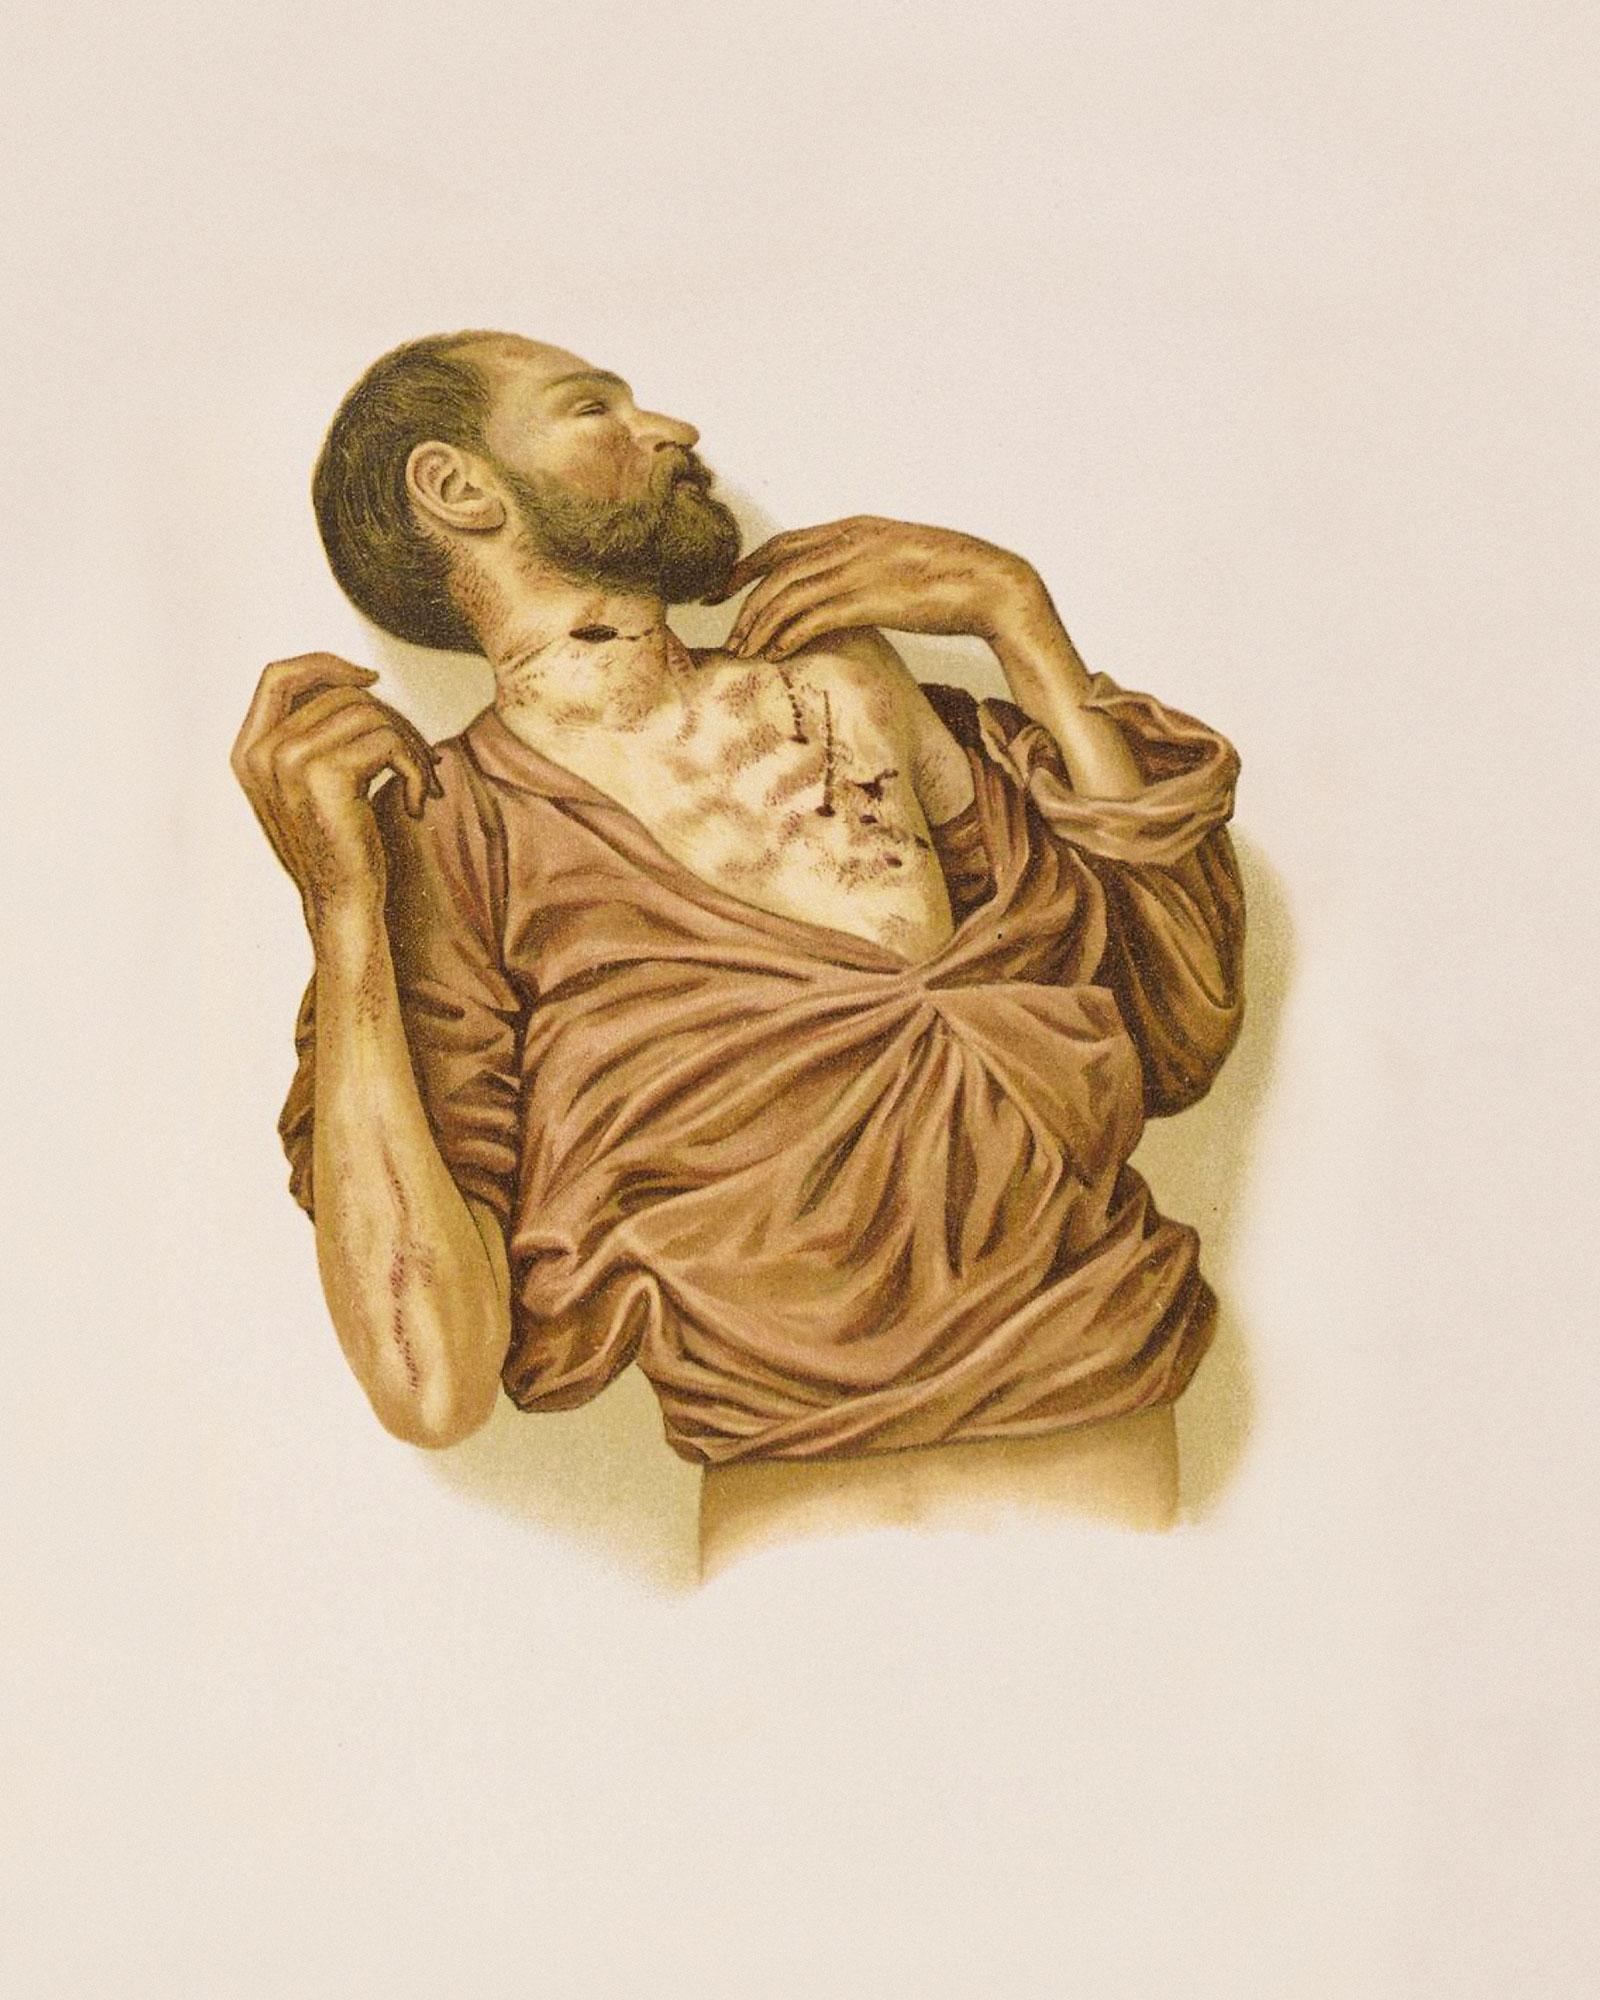 An eighteen ninety-eight forensic chromolithograph of a physician who committed suicide. That it was a case of suicide was demonstrated by, among other things, the proximity and symmetric disposition of the stab wounds.